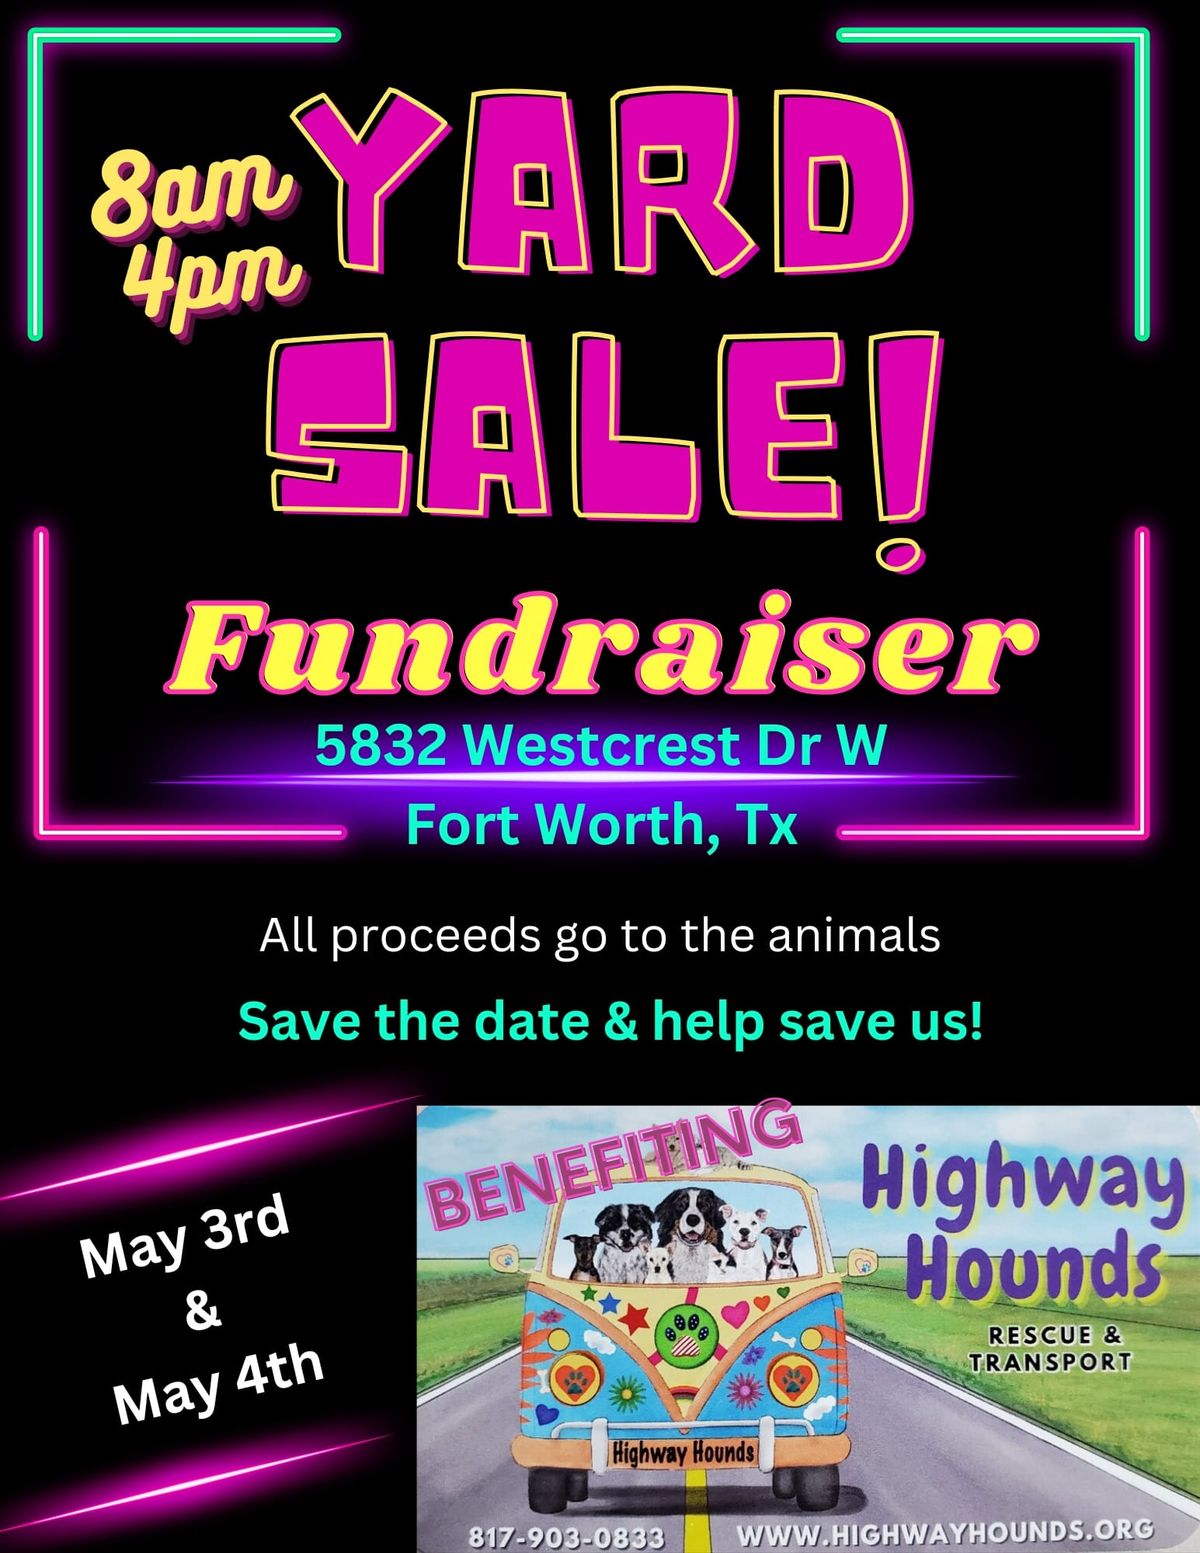 highway Hounds Rescue annual yard sale fundraiser 